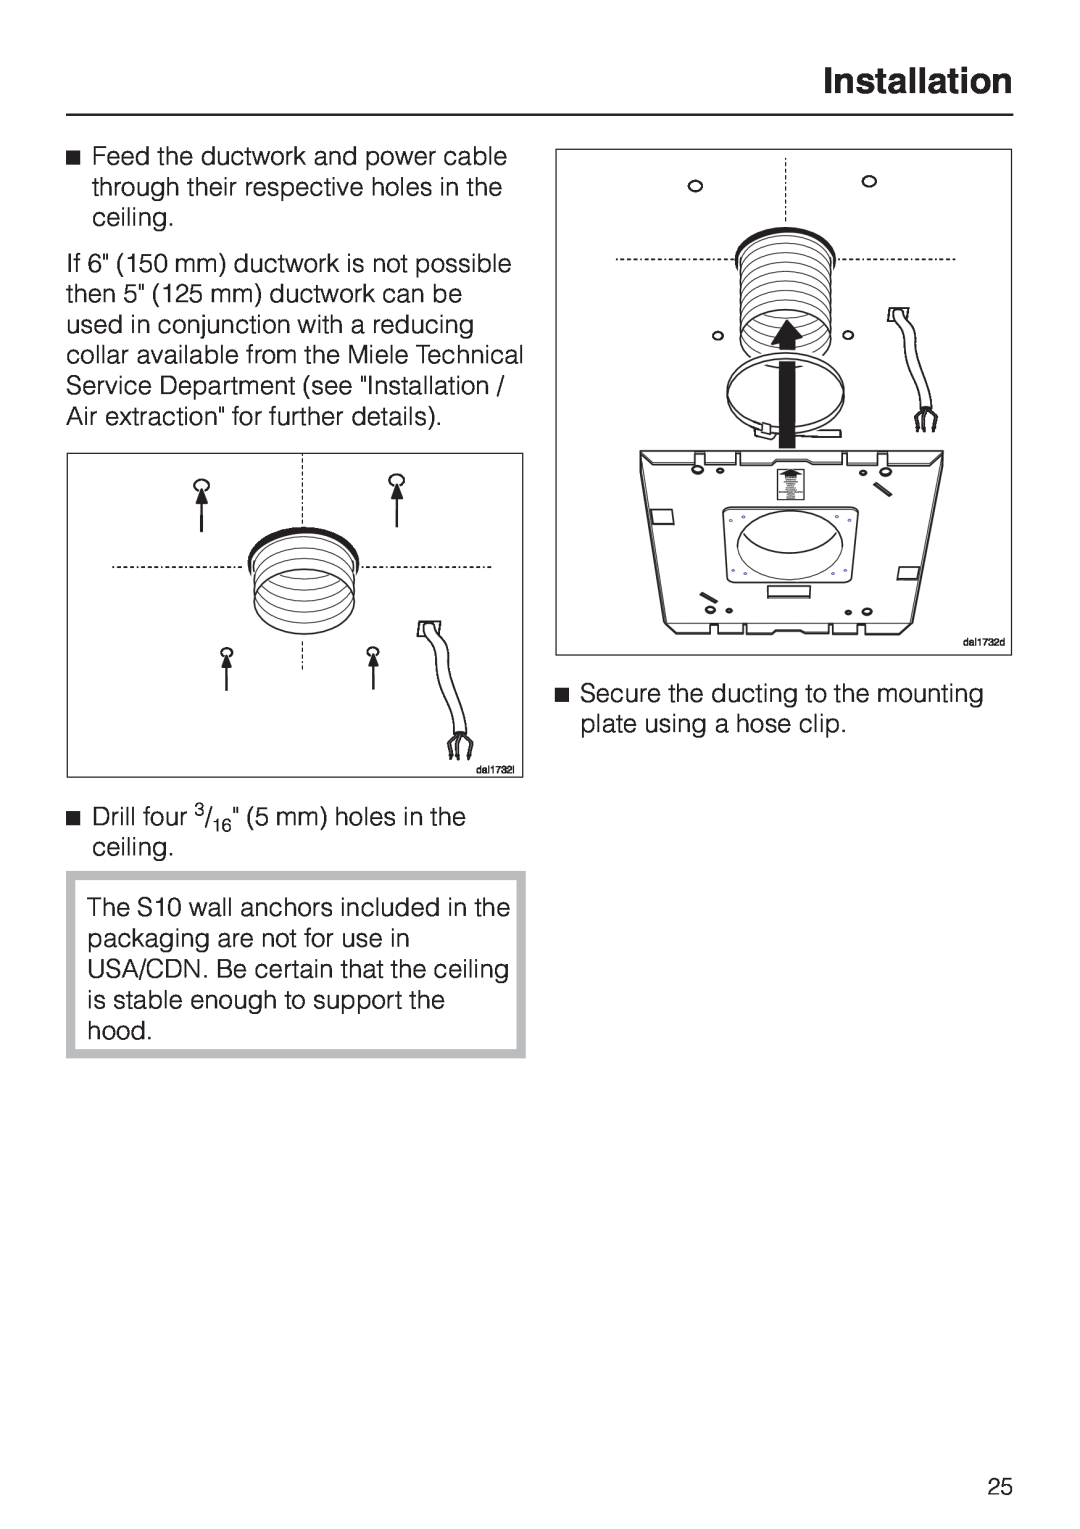 Miele DA220-3 installation instructions Installation, Drill four 3/16 5 mm holes in the ceiling 